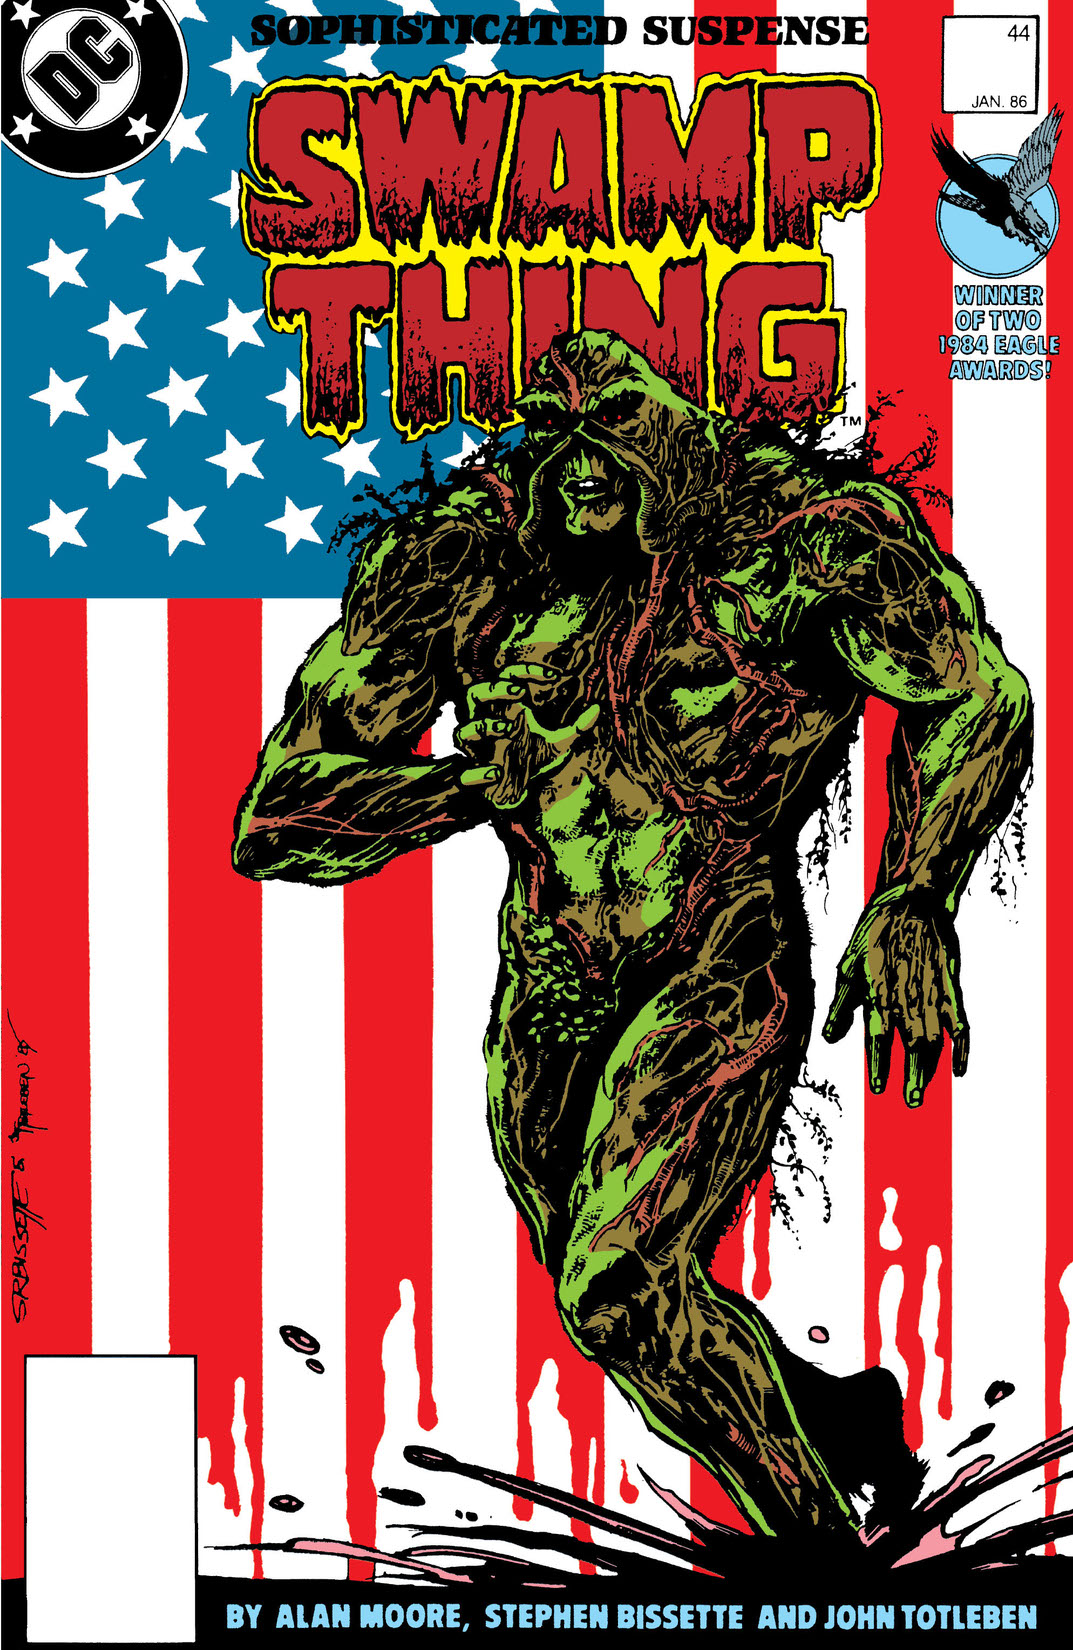 Swamp Thing (1985-) #44 preview images